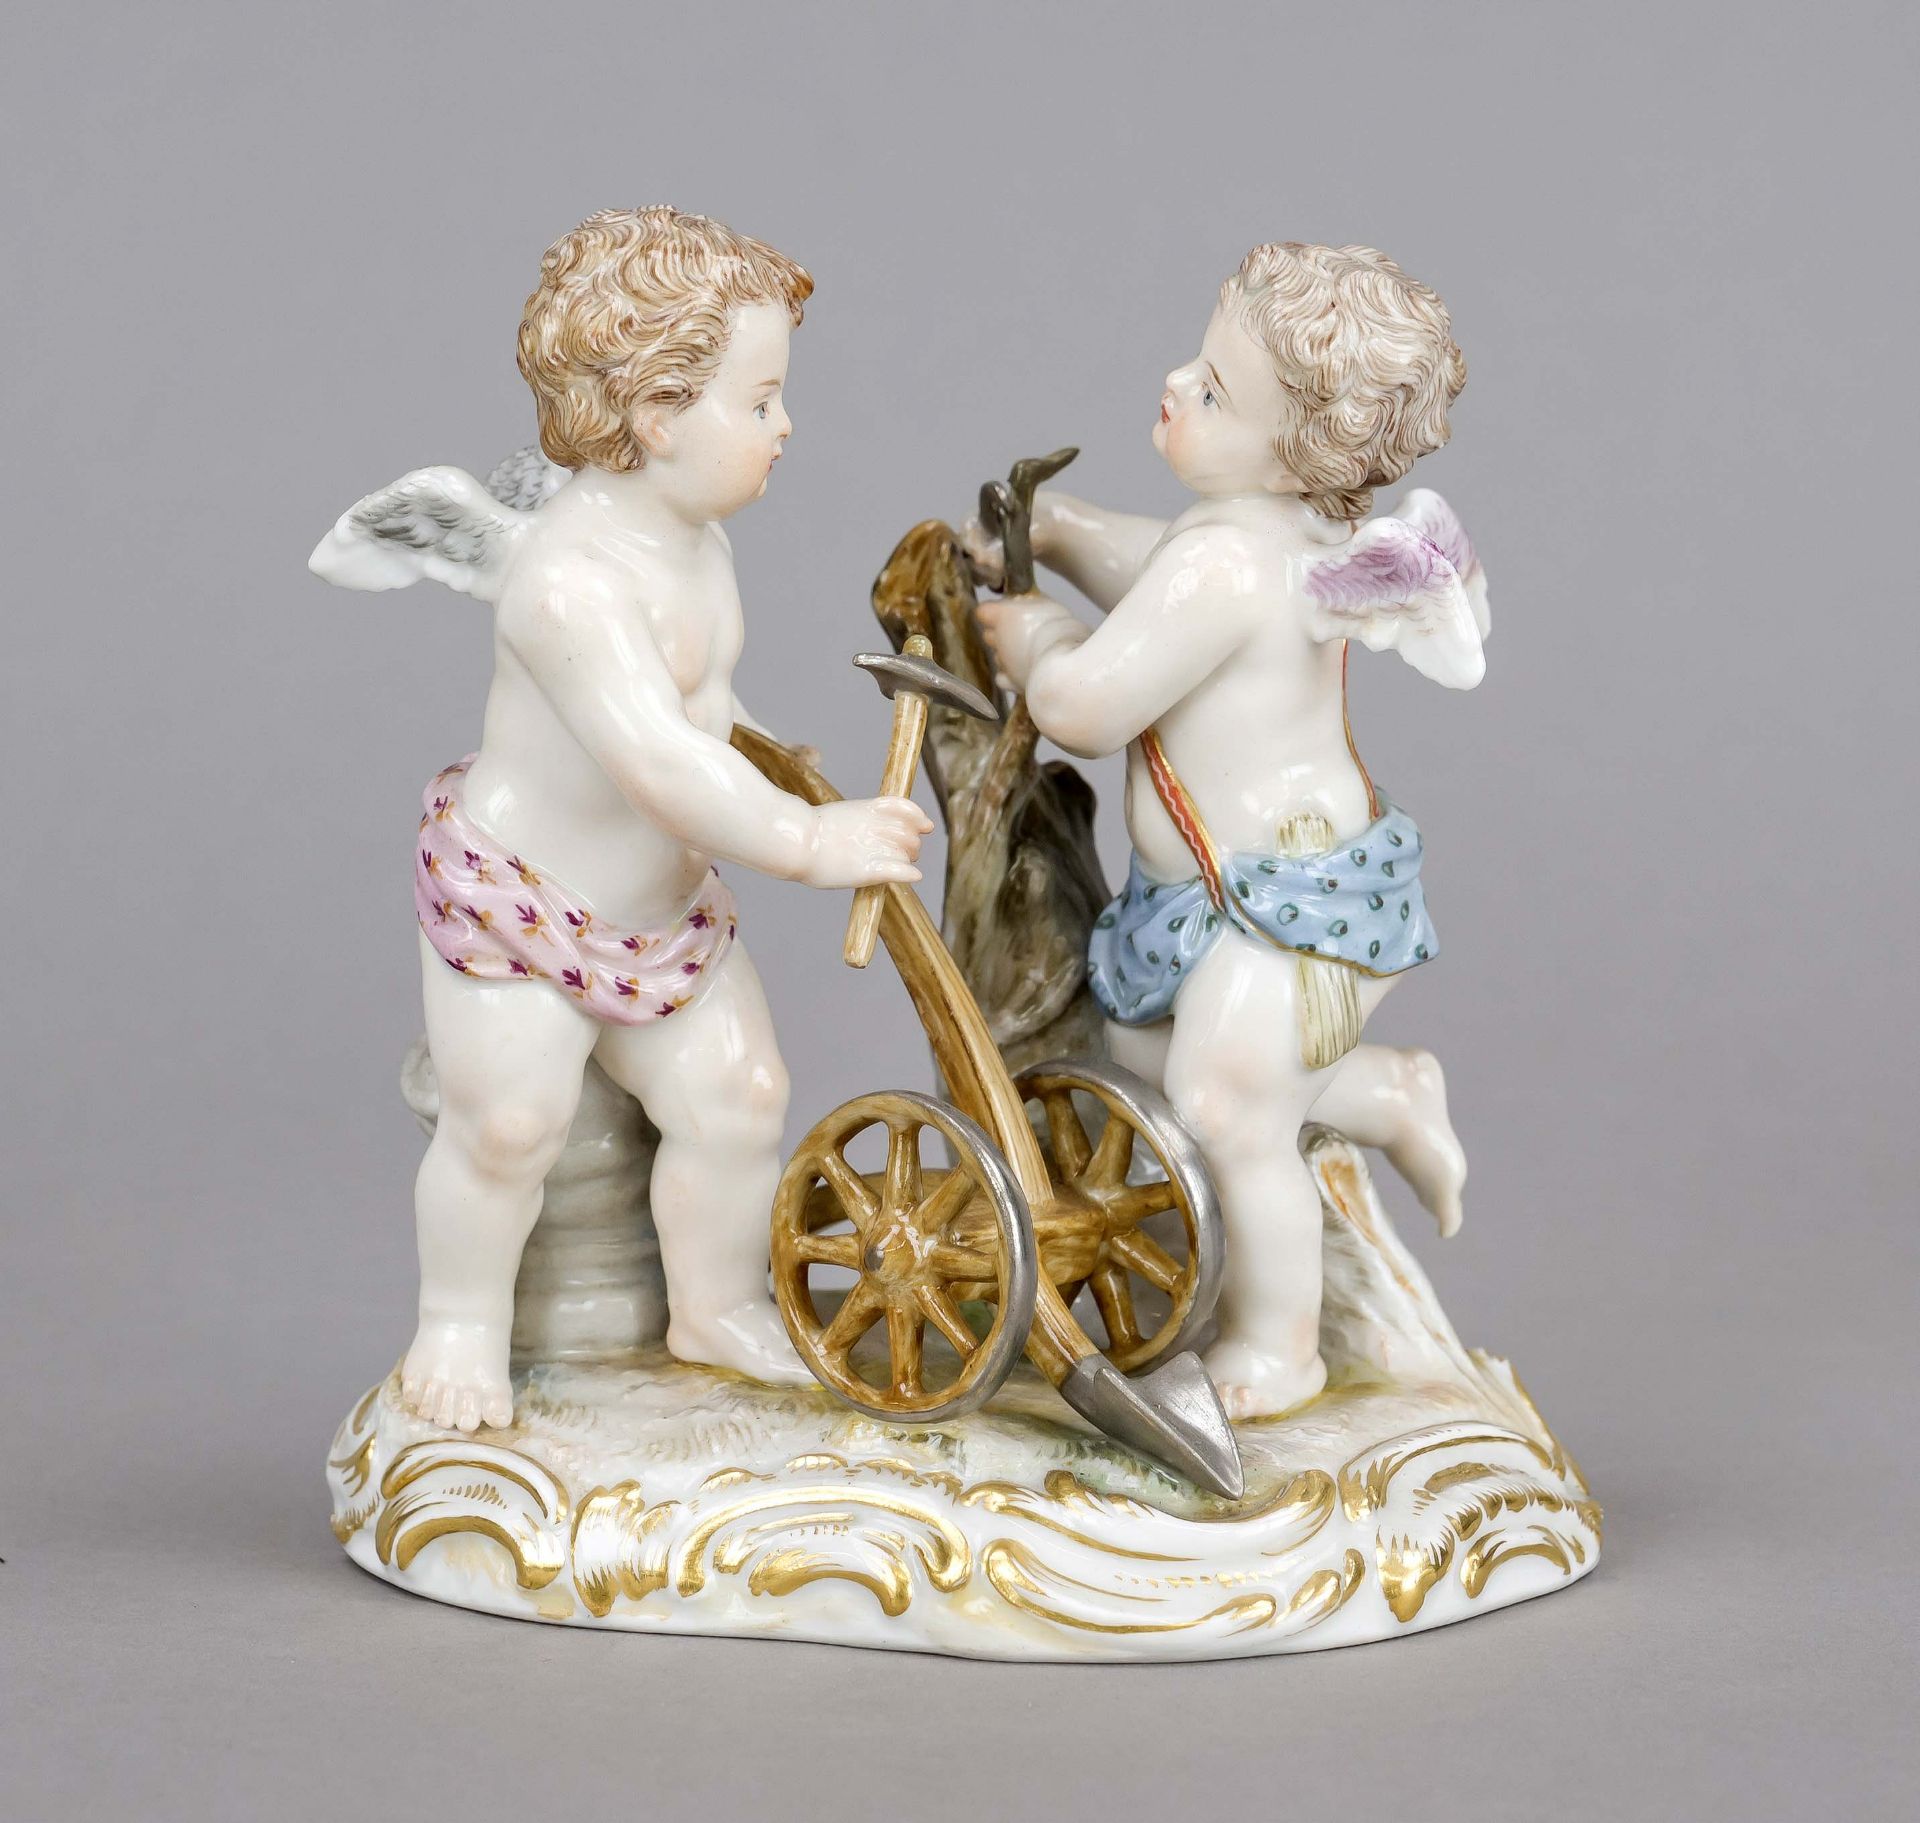 Allegory of Agriculture, Meissen, Knauff swords, mark 1850-1924, 1st choice, designed by Carl